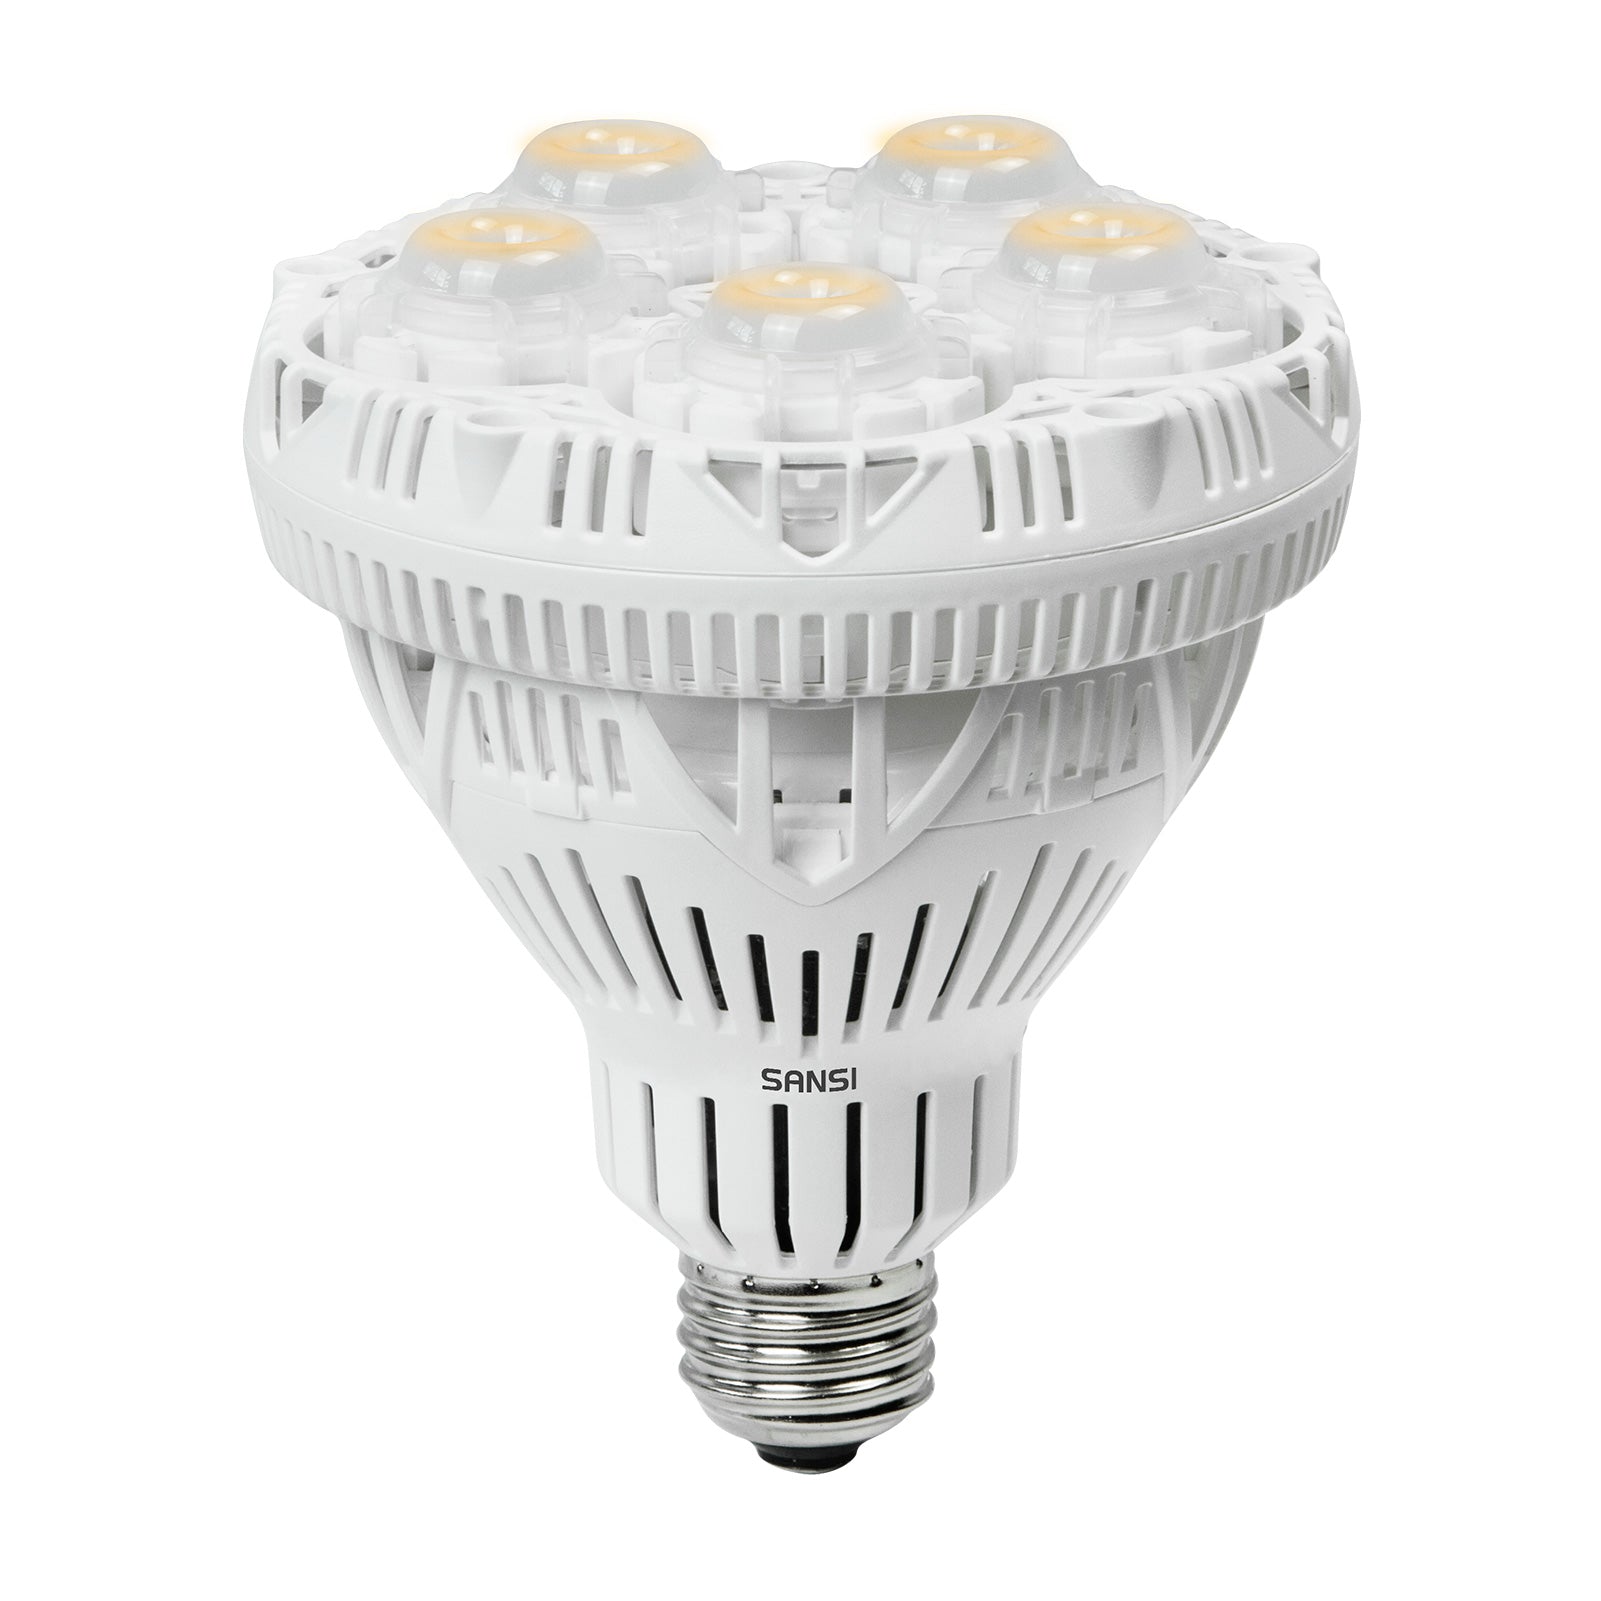 24W led grow light bulb with white light, suitable for high light and medium light indoor plants